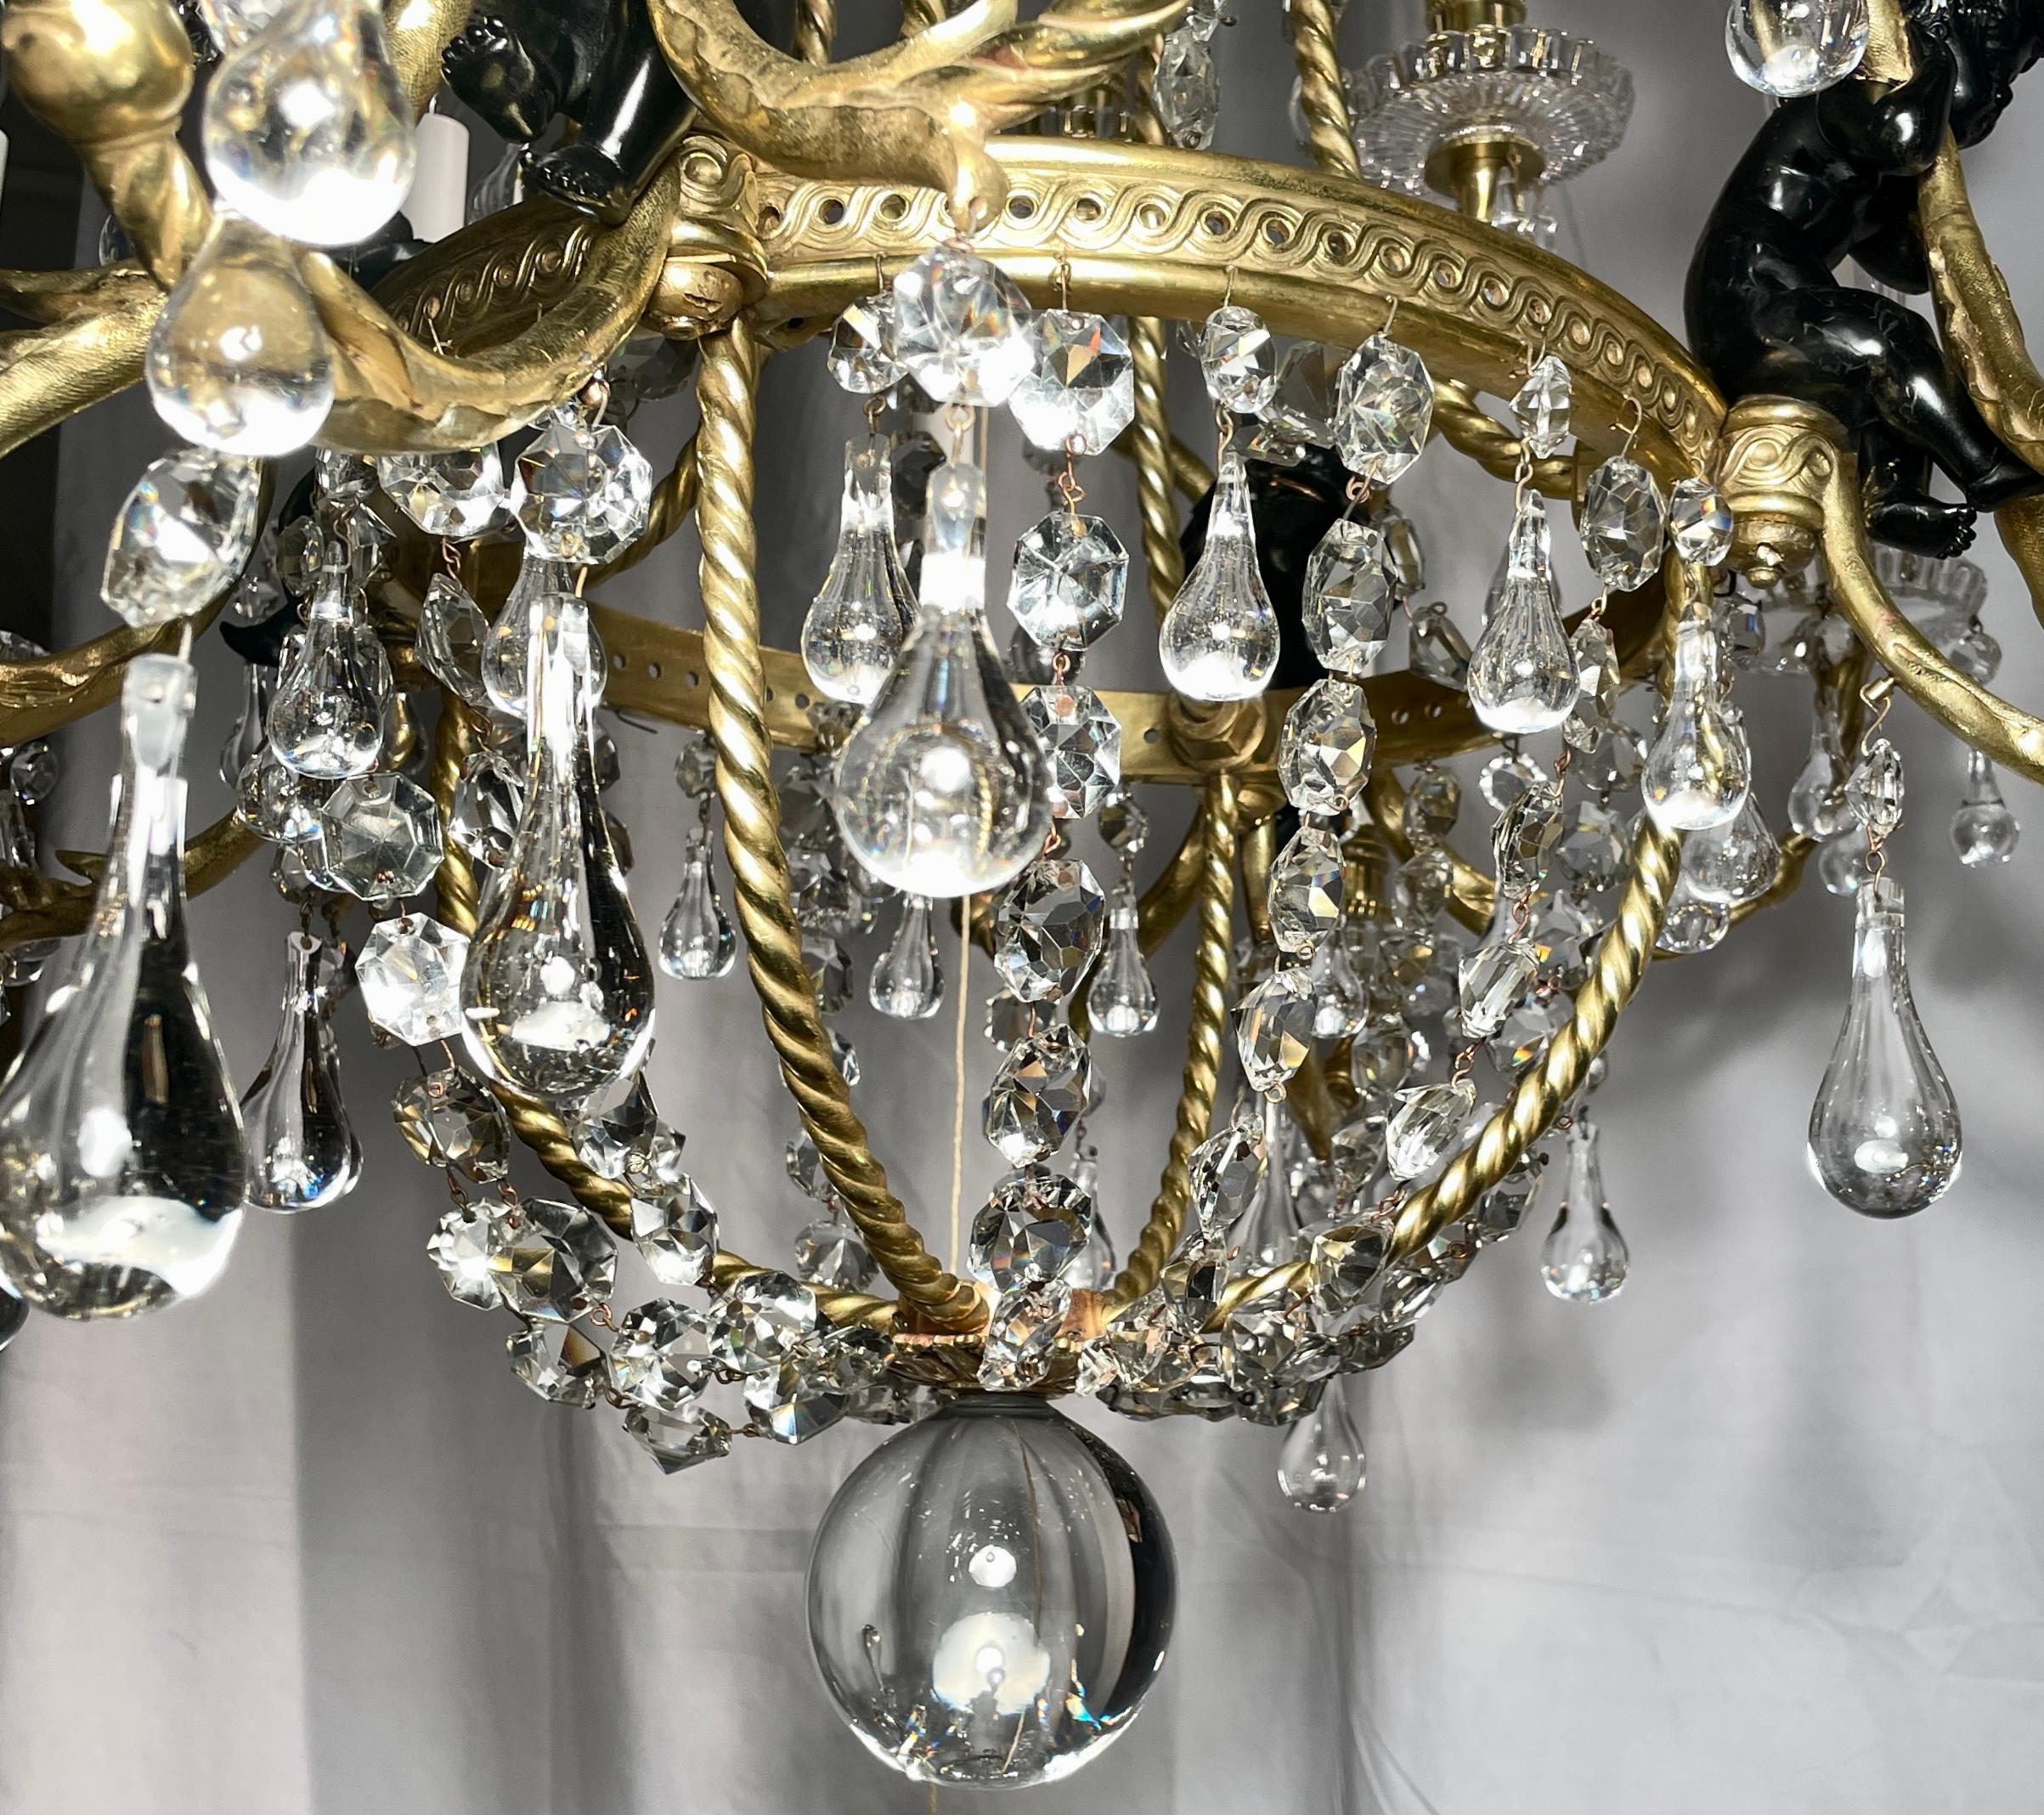 Antique French Baccarat Crystal & Bronze D'ore Chandelier, circa 1890 For Sale 5